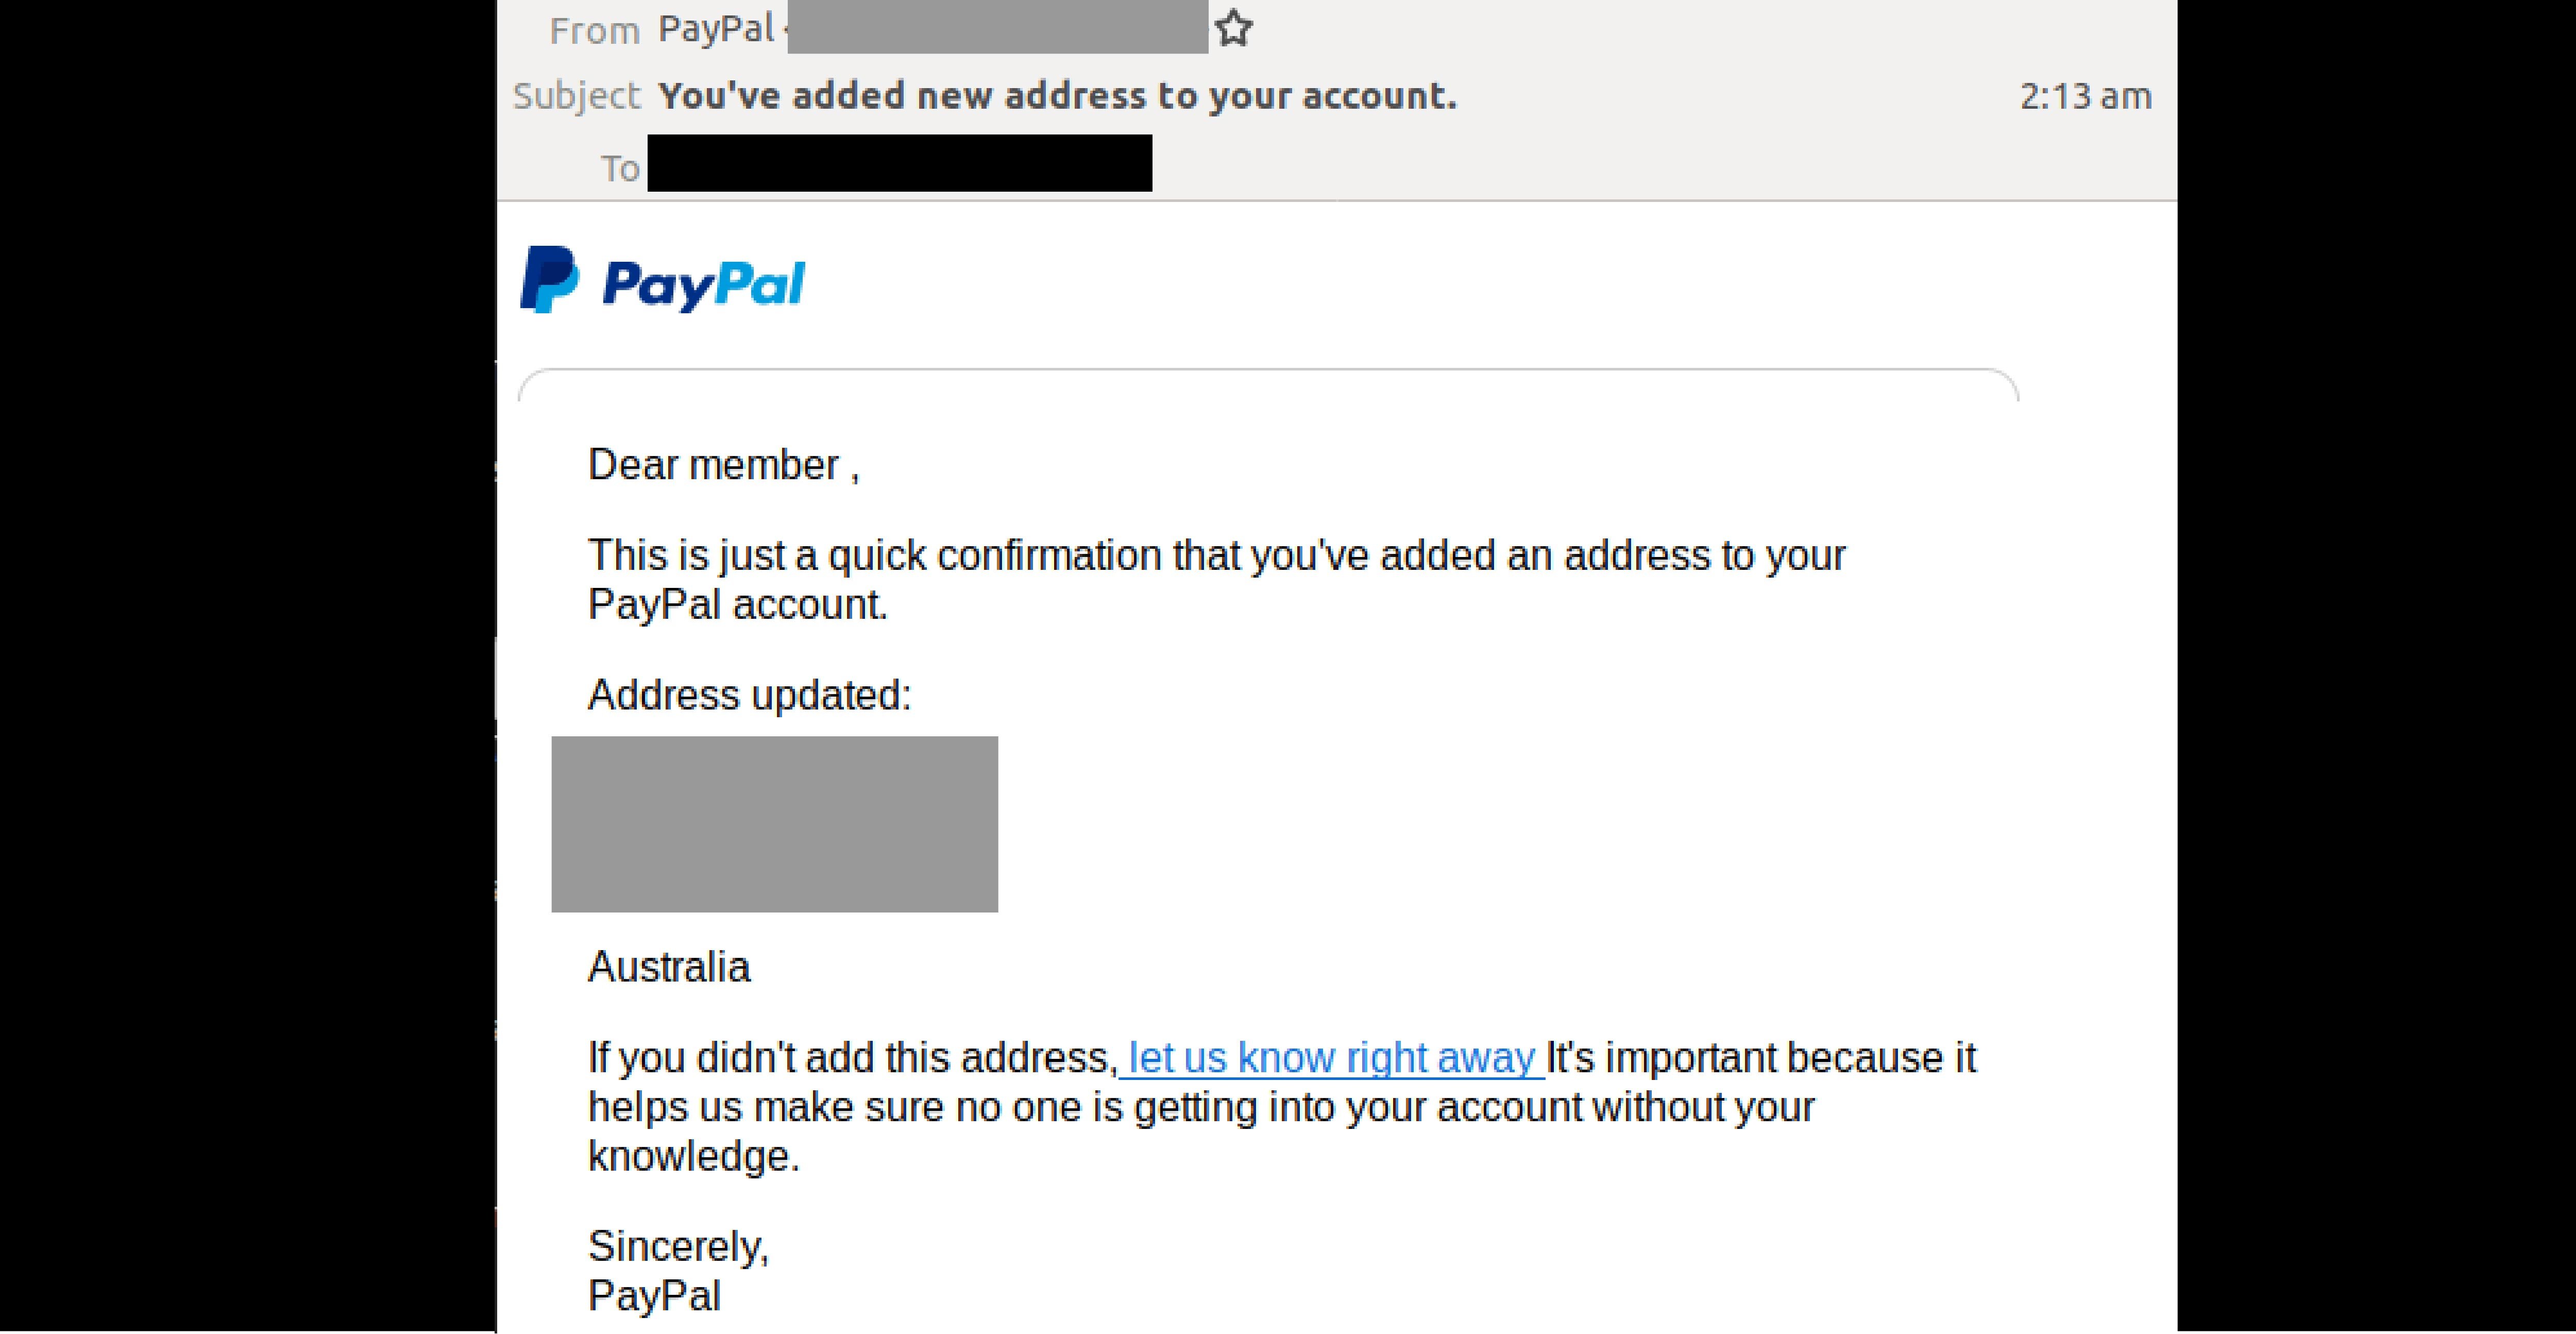 Phishing email impersonating PayPal confirms the addition of a new address